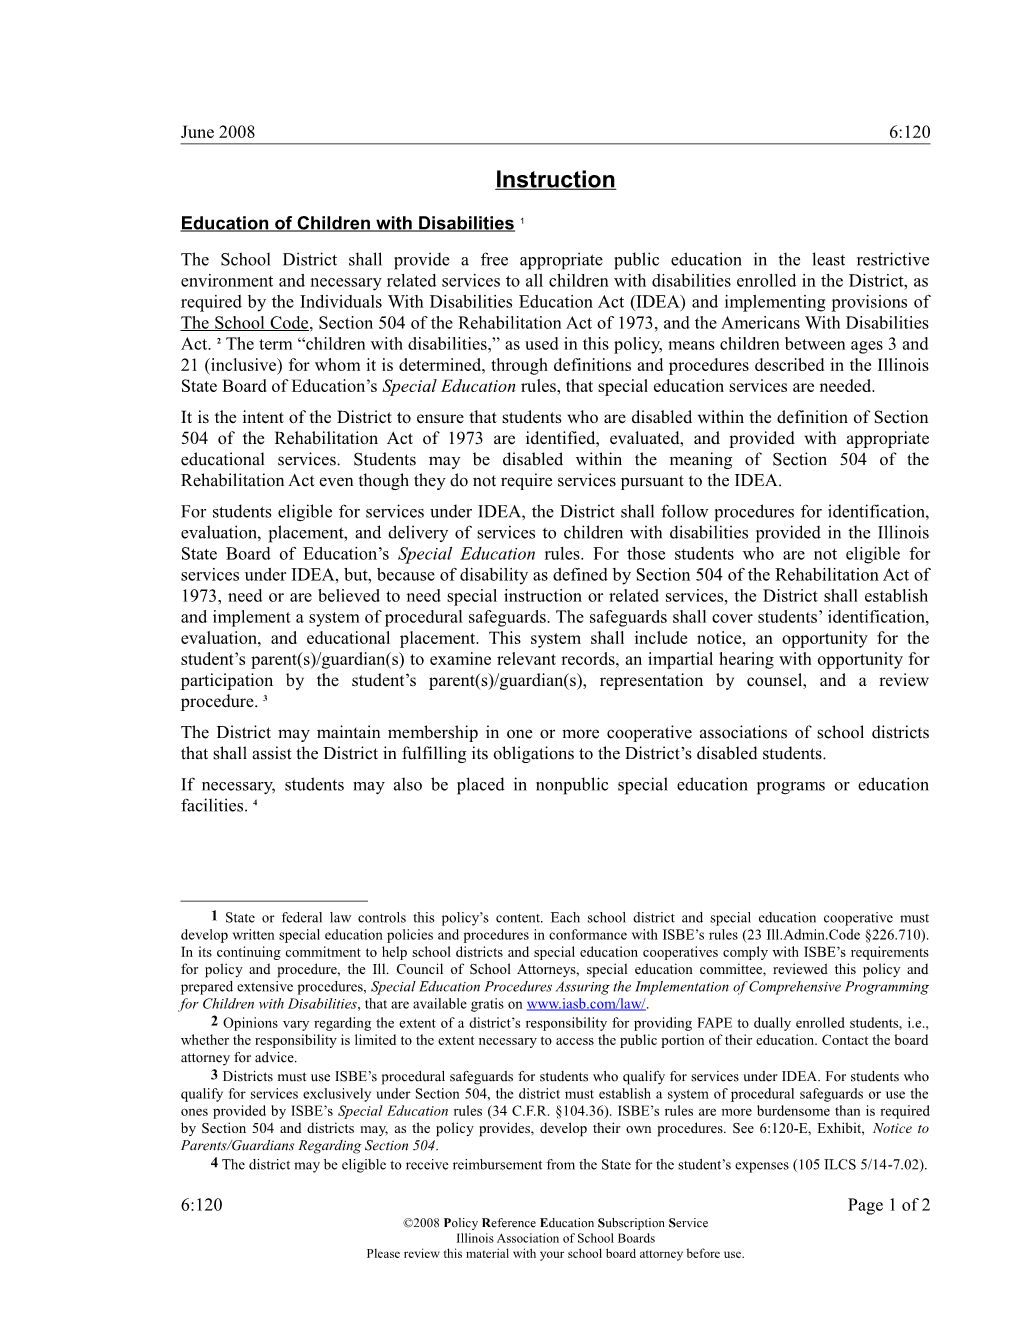 Education of Children with Disabilities 1